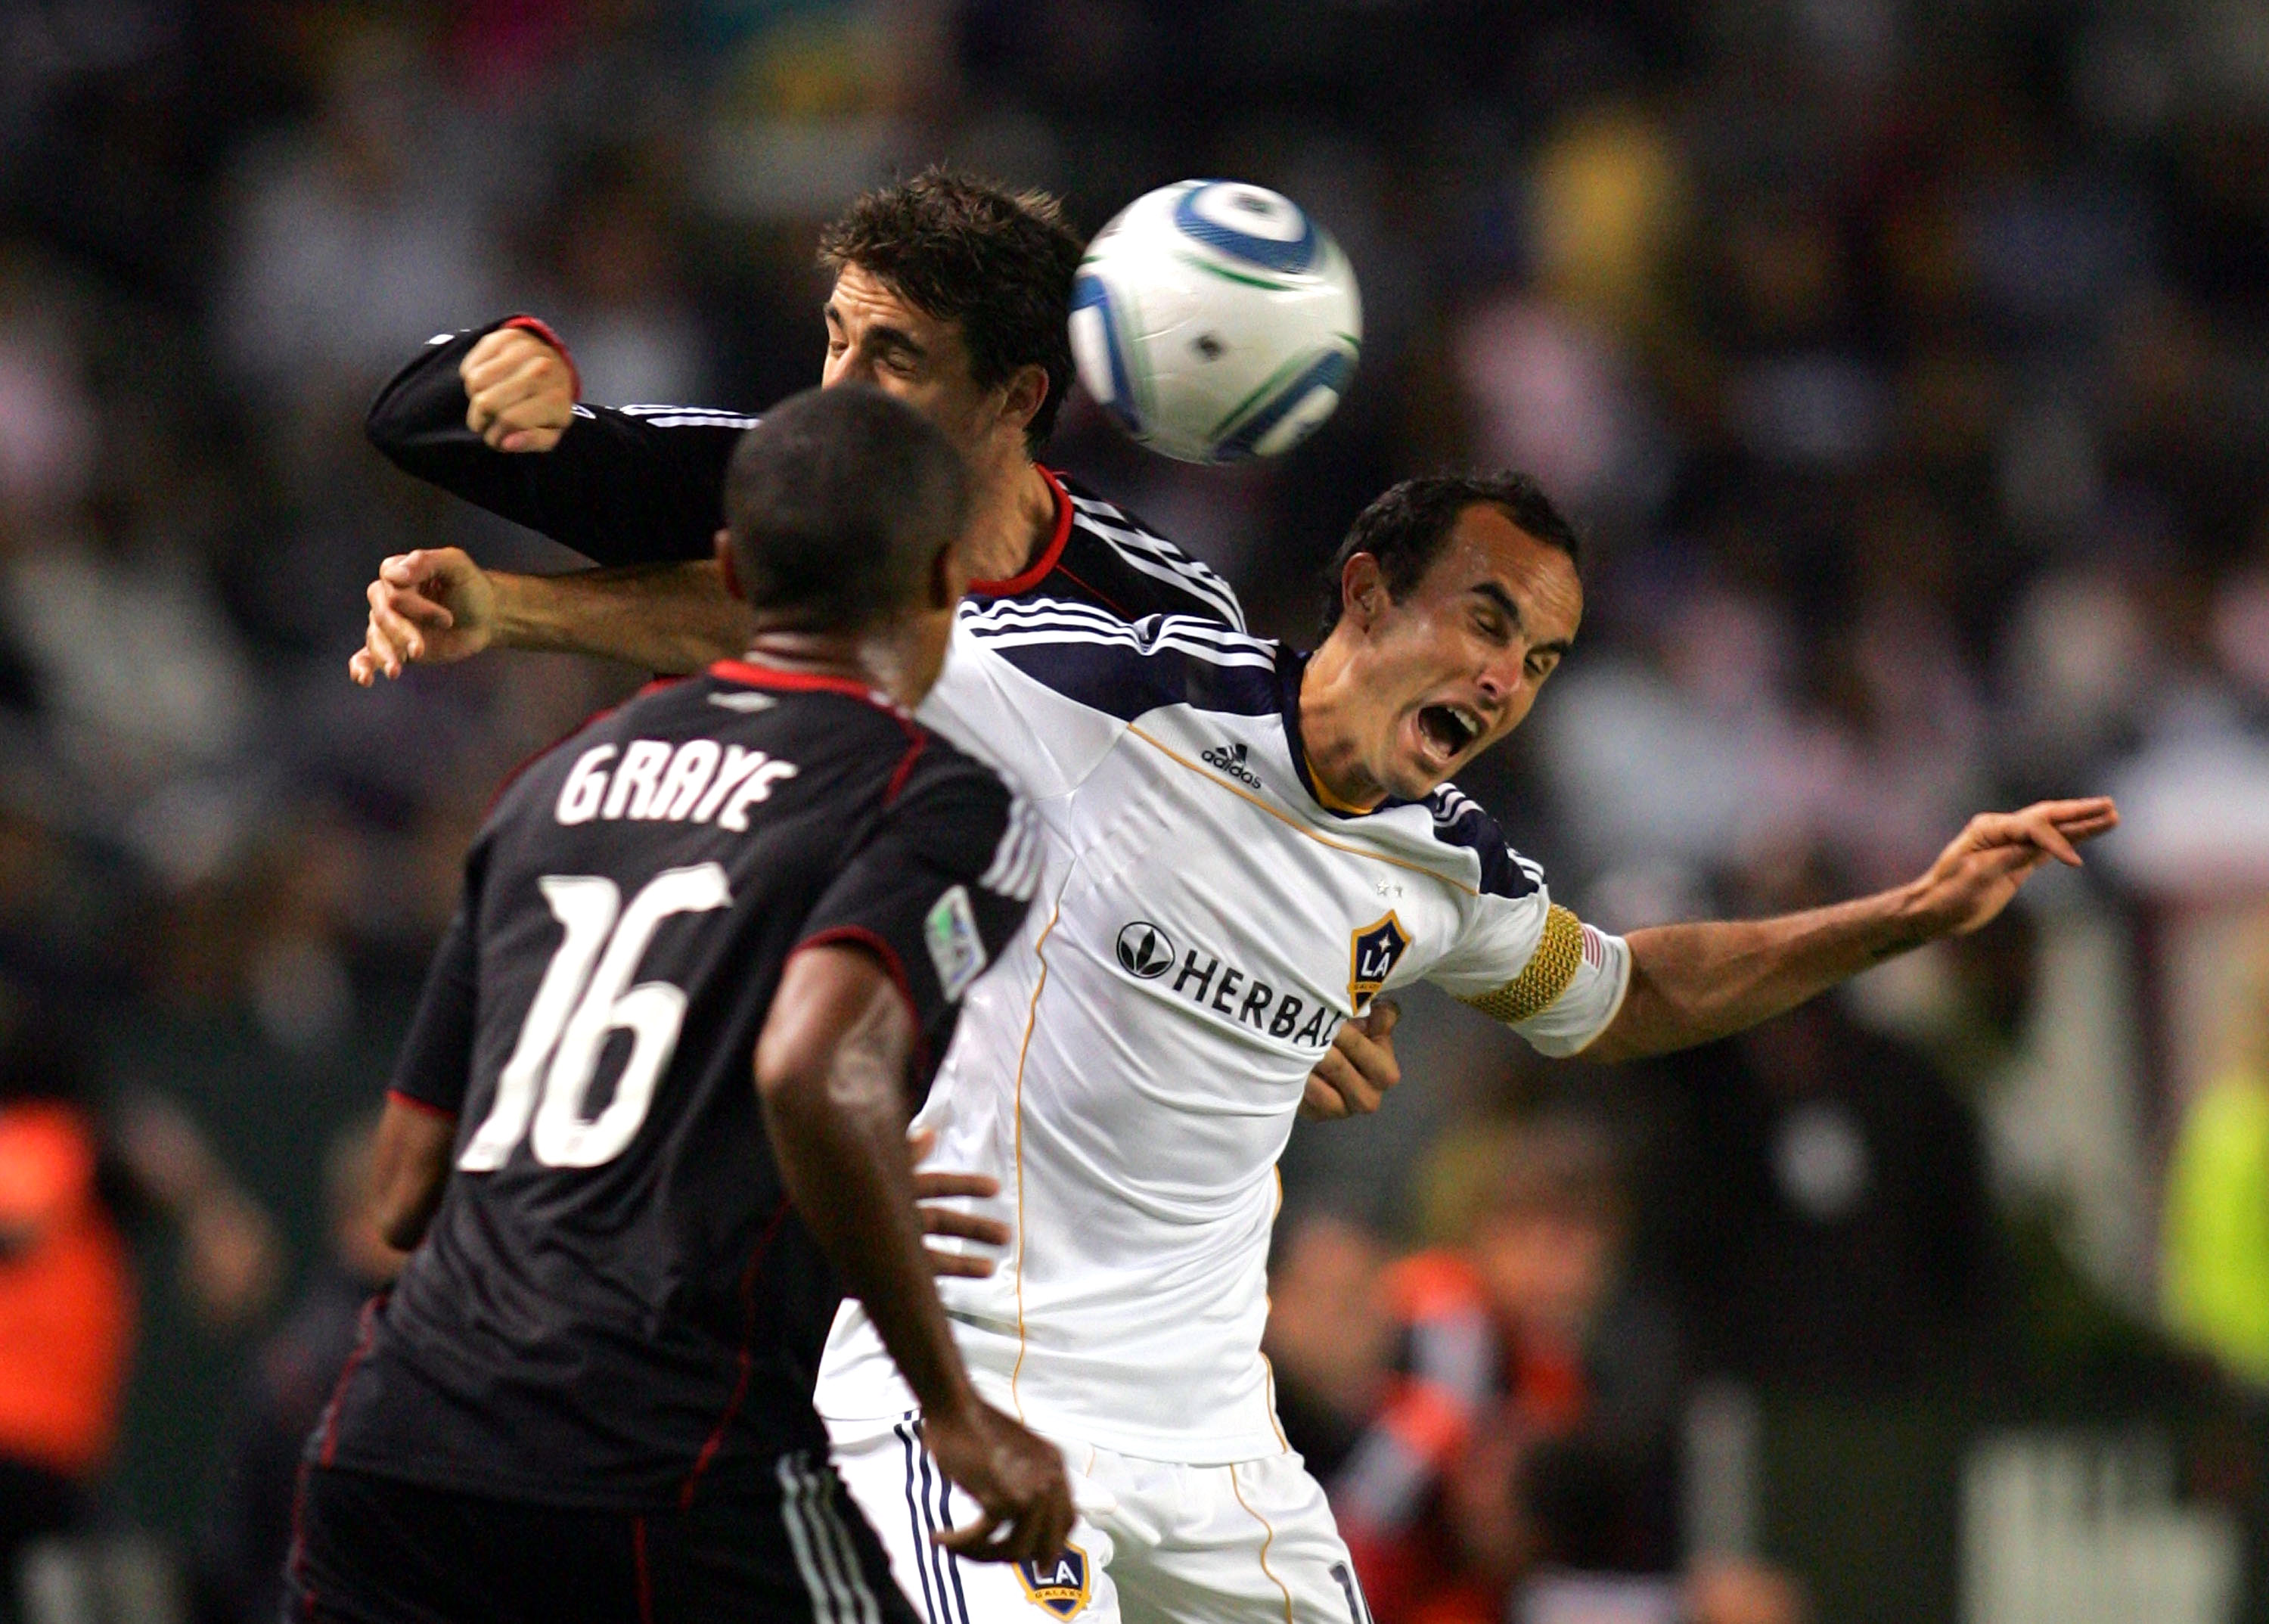 CARSON, CA - SEPTEMBER 18:  Landon Donovan #10 of the Los Angeles Galaxy and Dejan Jakovic #5 of D.C. United vie for the hight ball in the second half during the MLS match at The Home Depot Center on September 18, 2010 in Carson, California. The Galaxy de